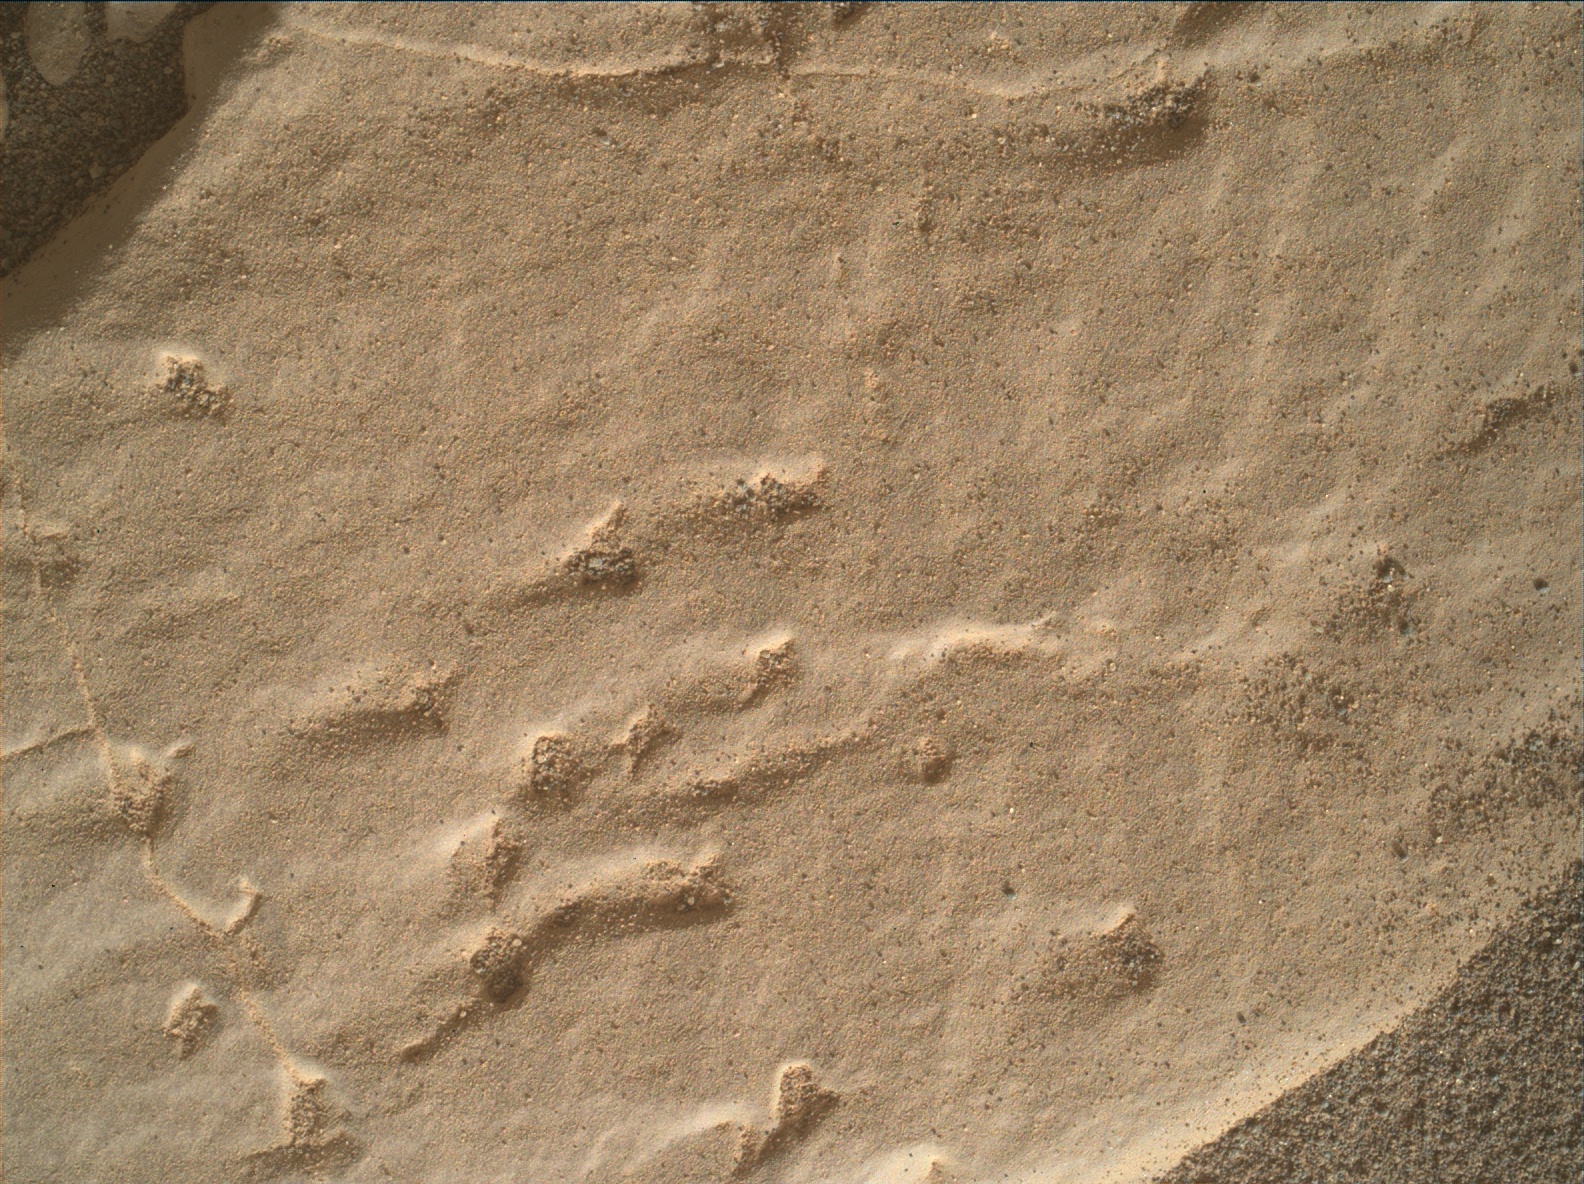 Nasa's Mars rover Curiosity acquired this image using its Mars Hand Lens Imager (MAHLI) on Sol 2439